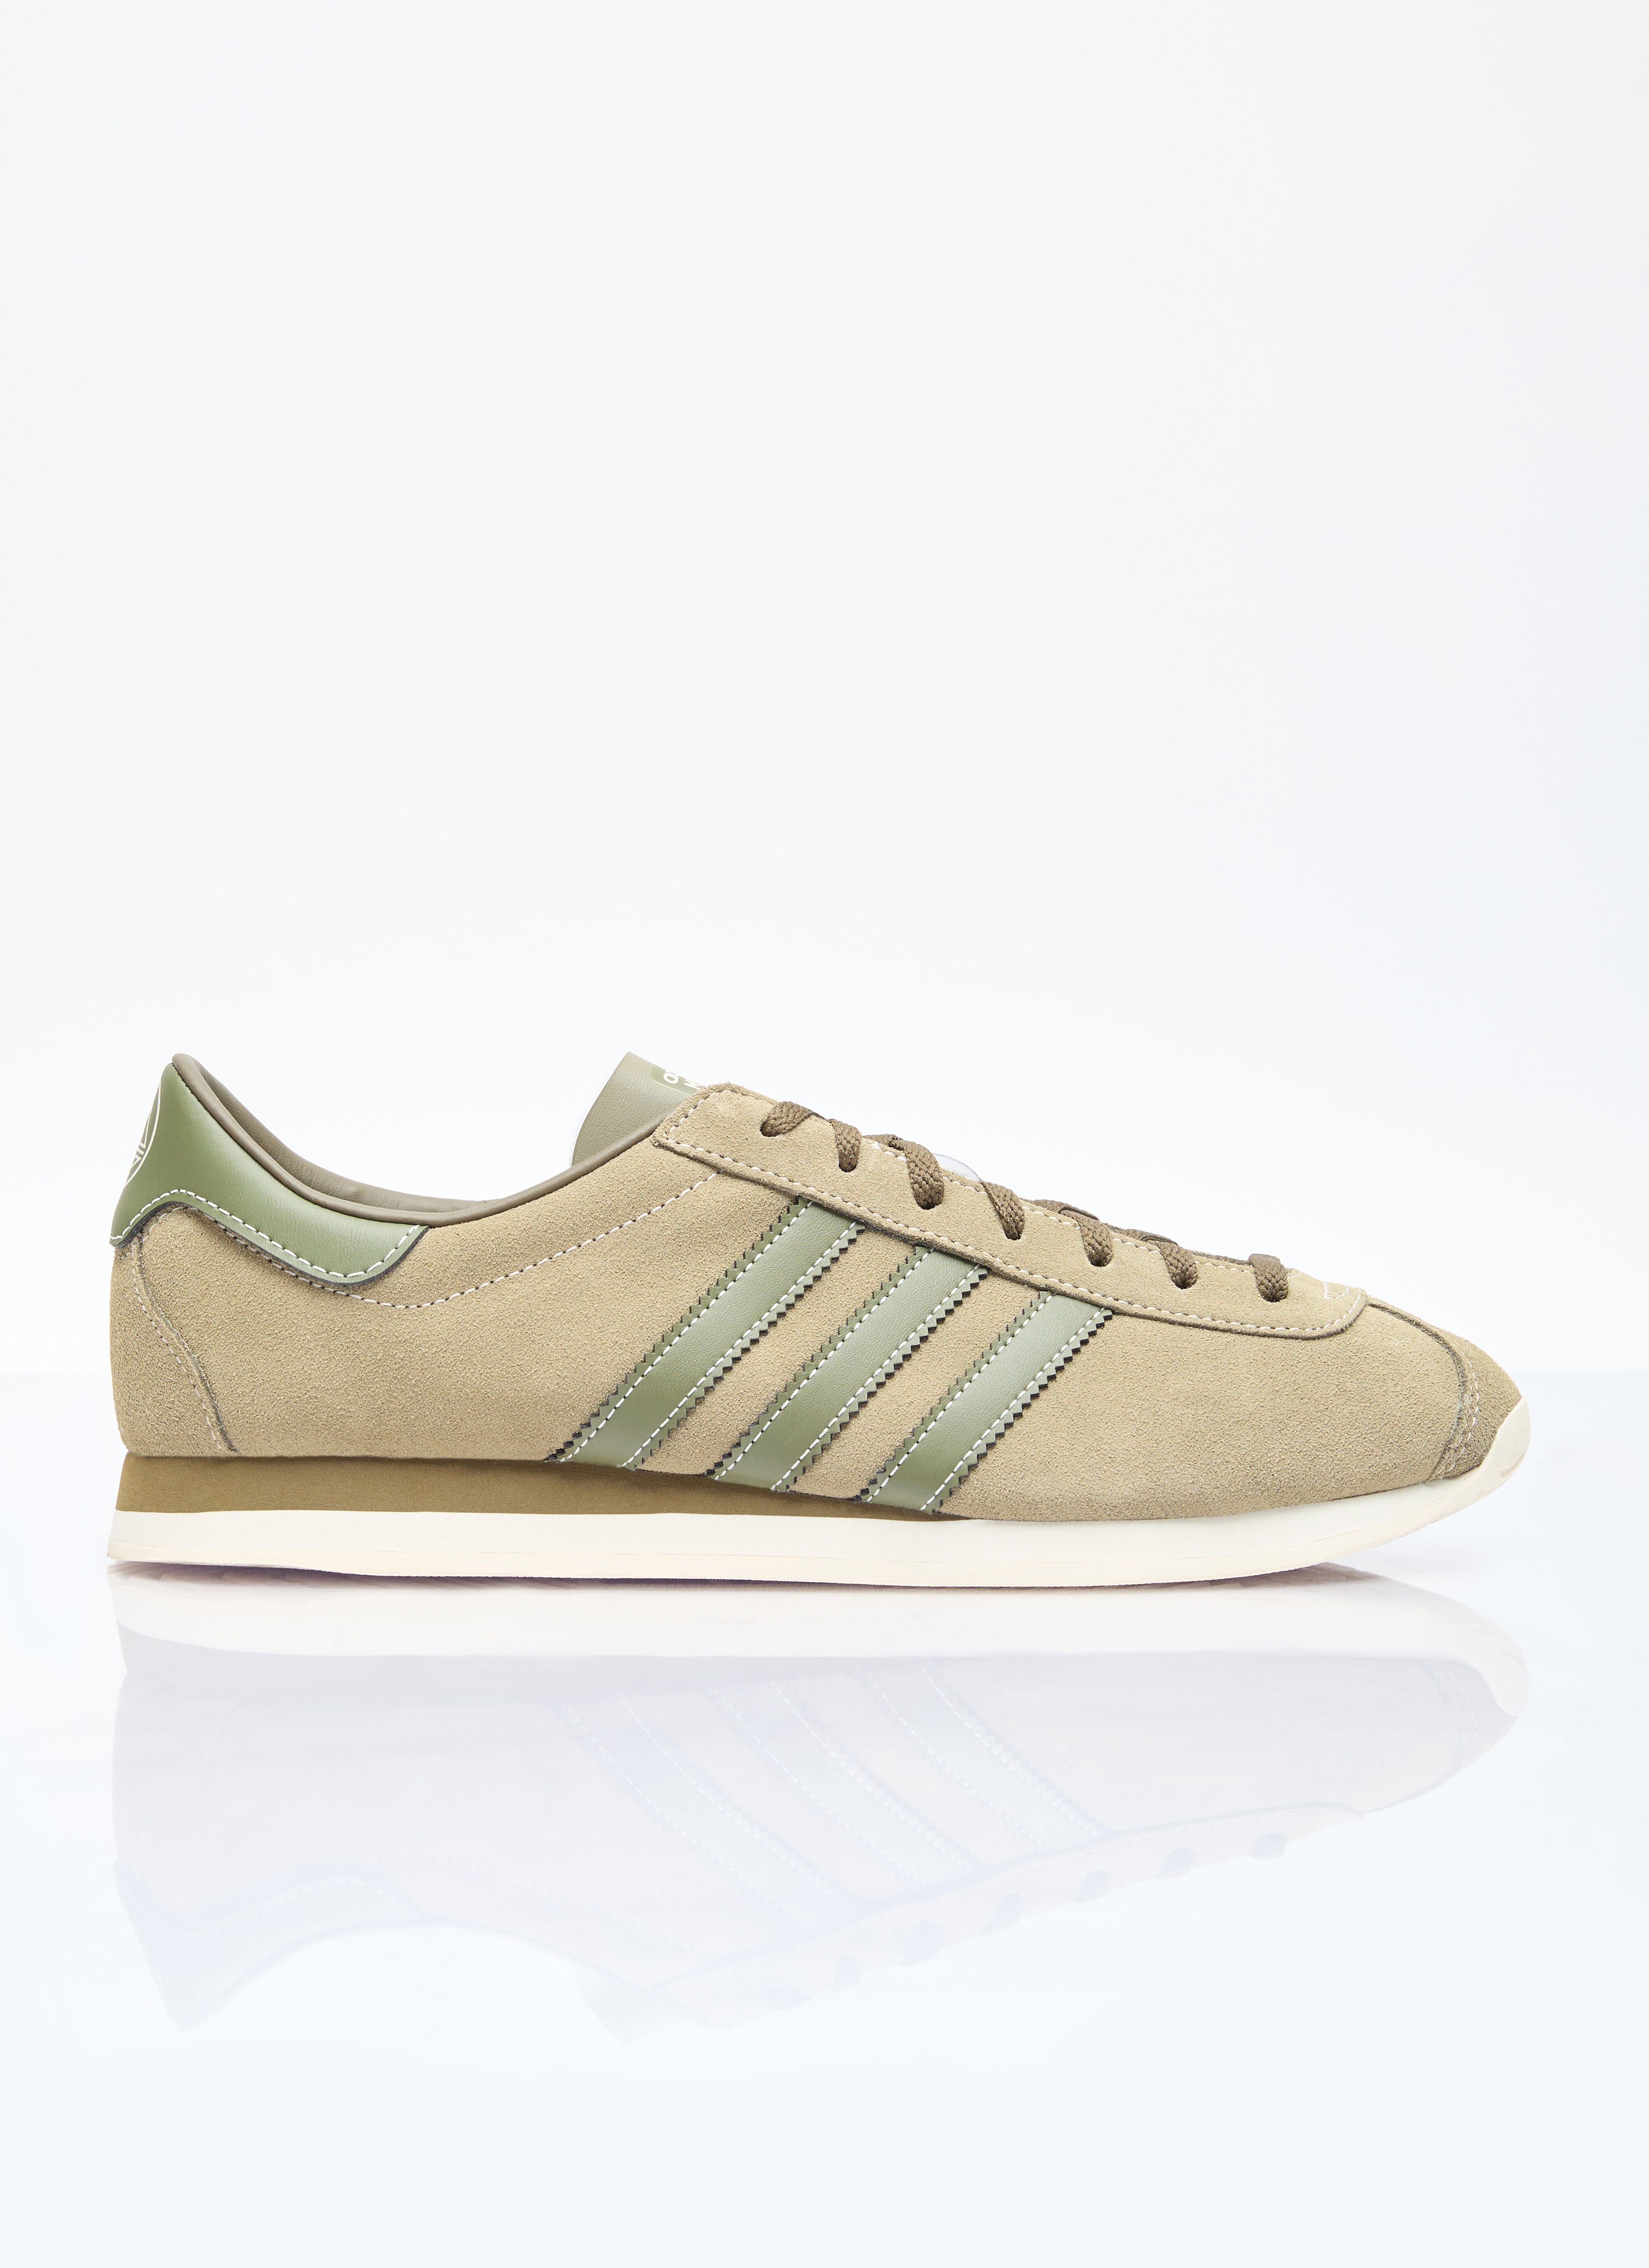 adidas by Wales Bonner Moston Super Spzl Sneakers Yellow awb0357010